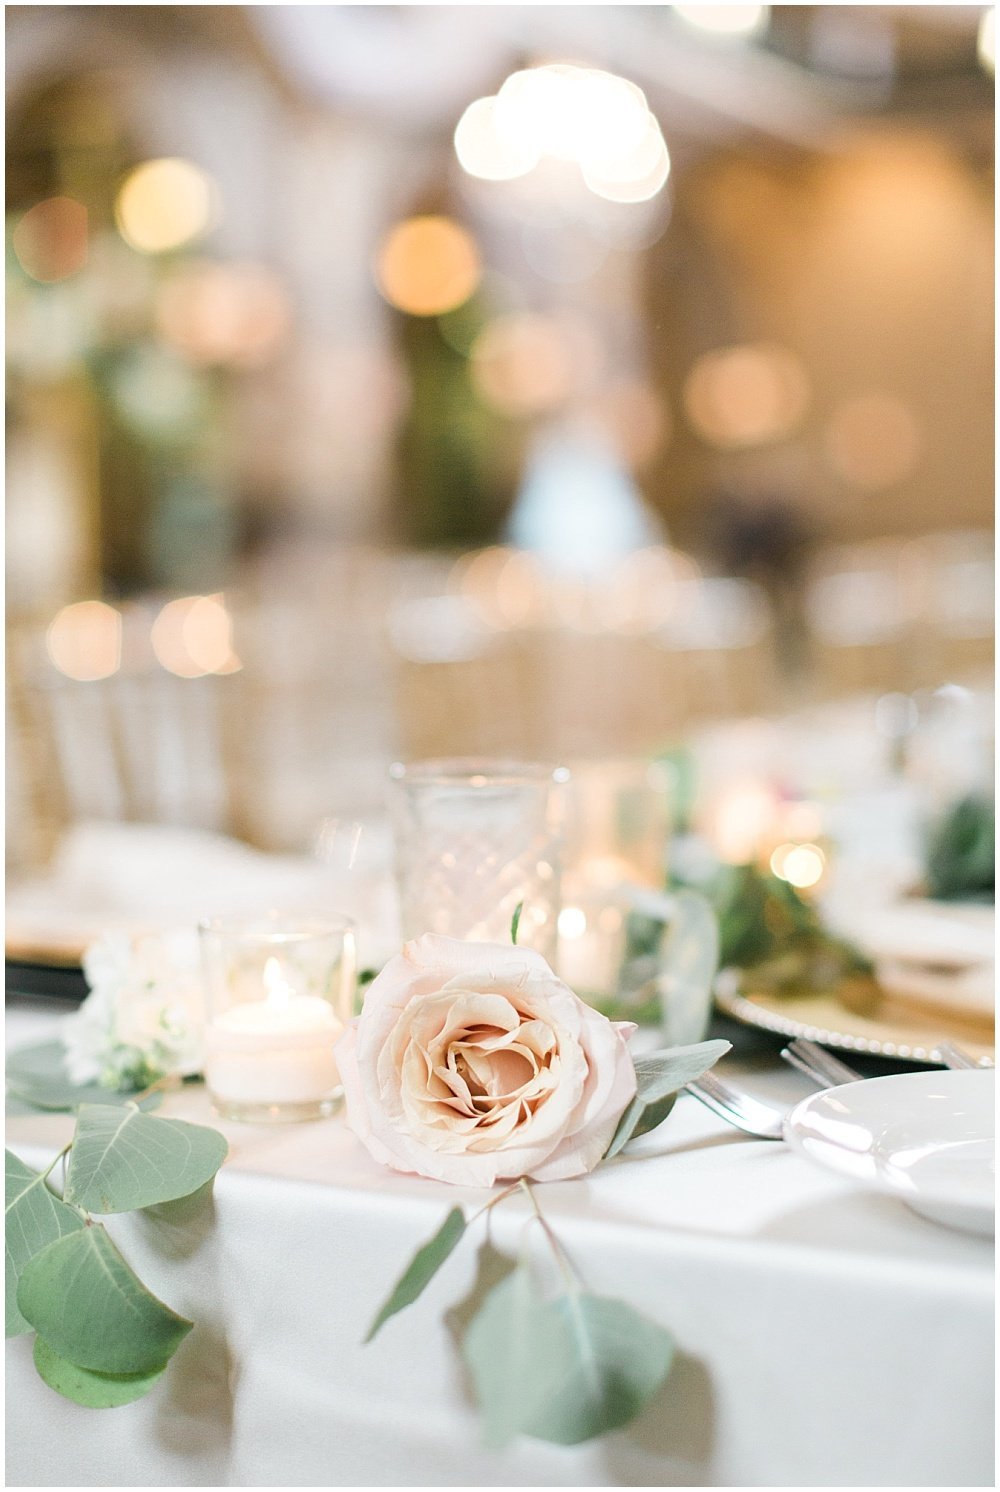 Summer-Mexican-Inspired-Gold-And-Floral-Crowne-Plaza-Indianapolis-Downtown-Union-Station-Wedding-Cory-Jackie-Wedding-Photographers-Jessica-Dum-Wedding-Coordination_photo___0036